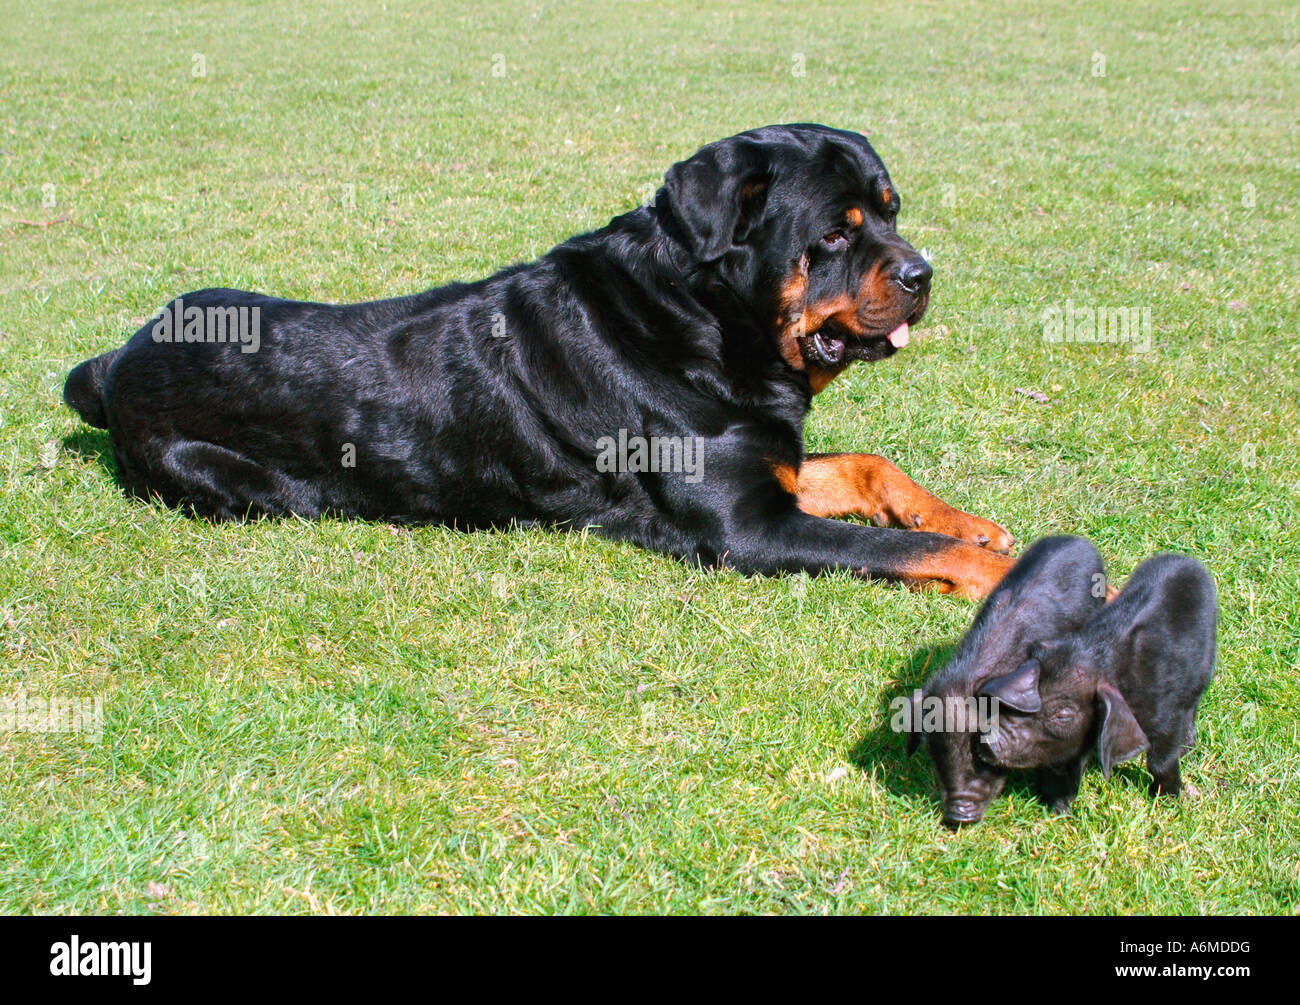 Oscar The Rottweiler Guarding His Two Adopted British Black Piglets. Stock Photo